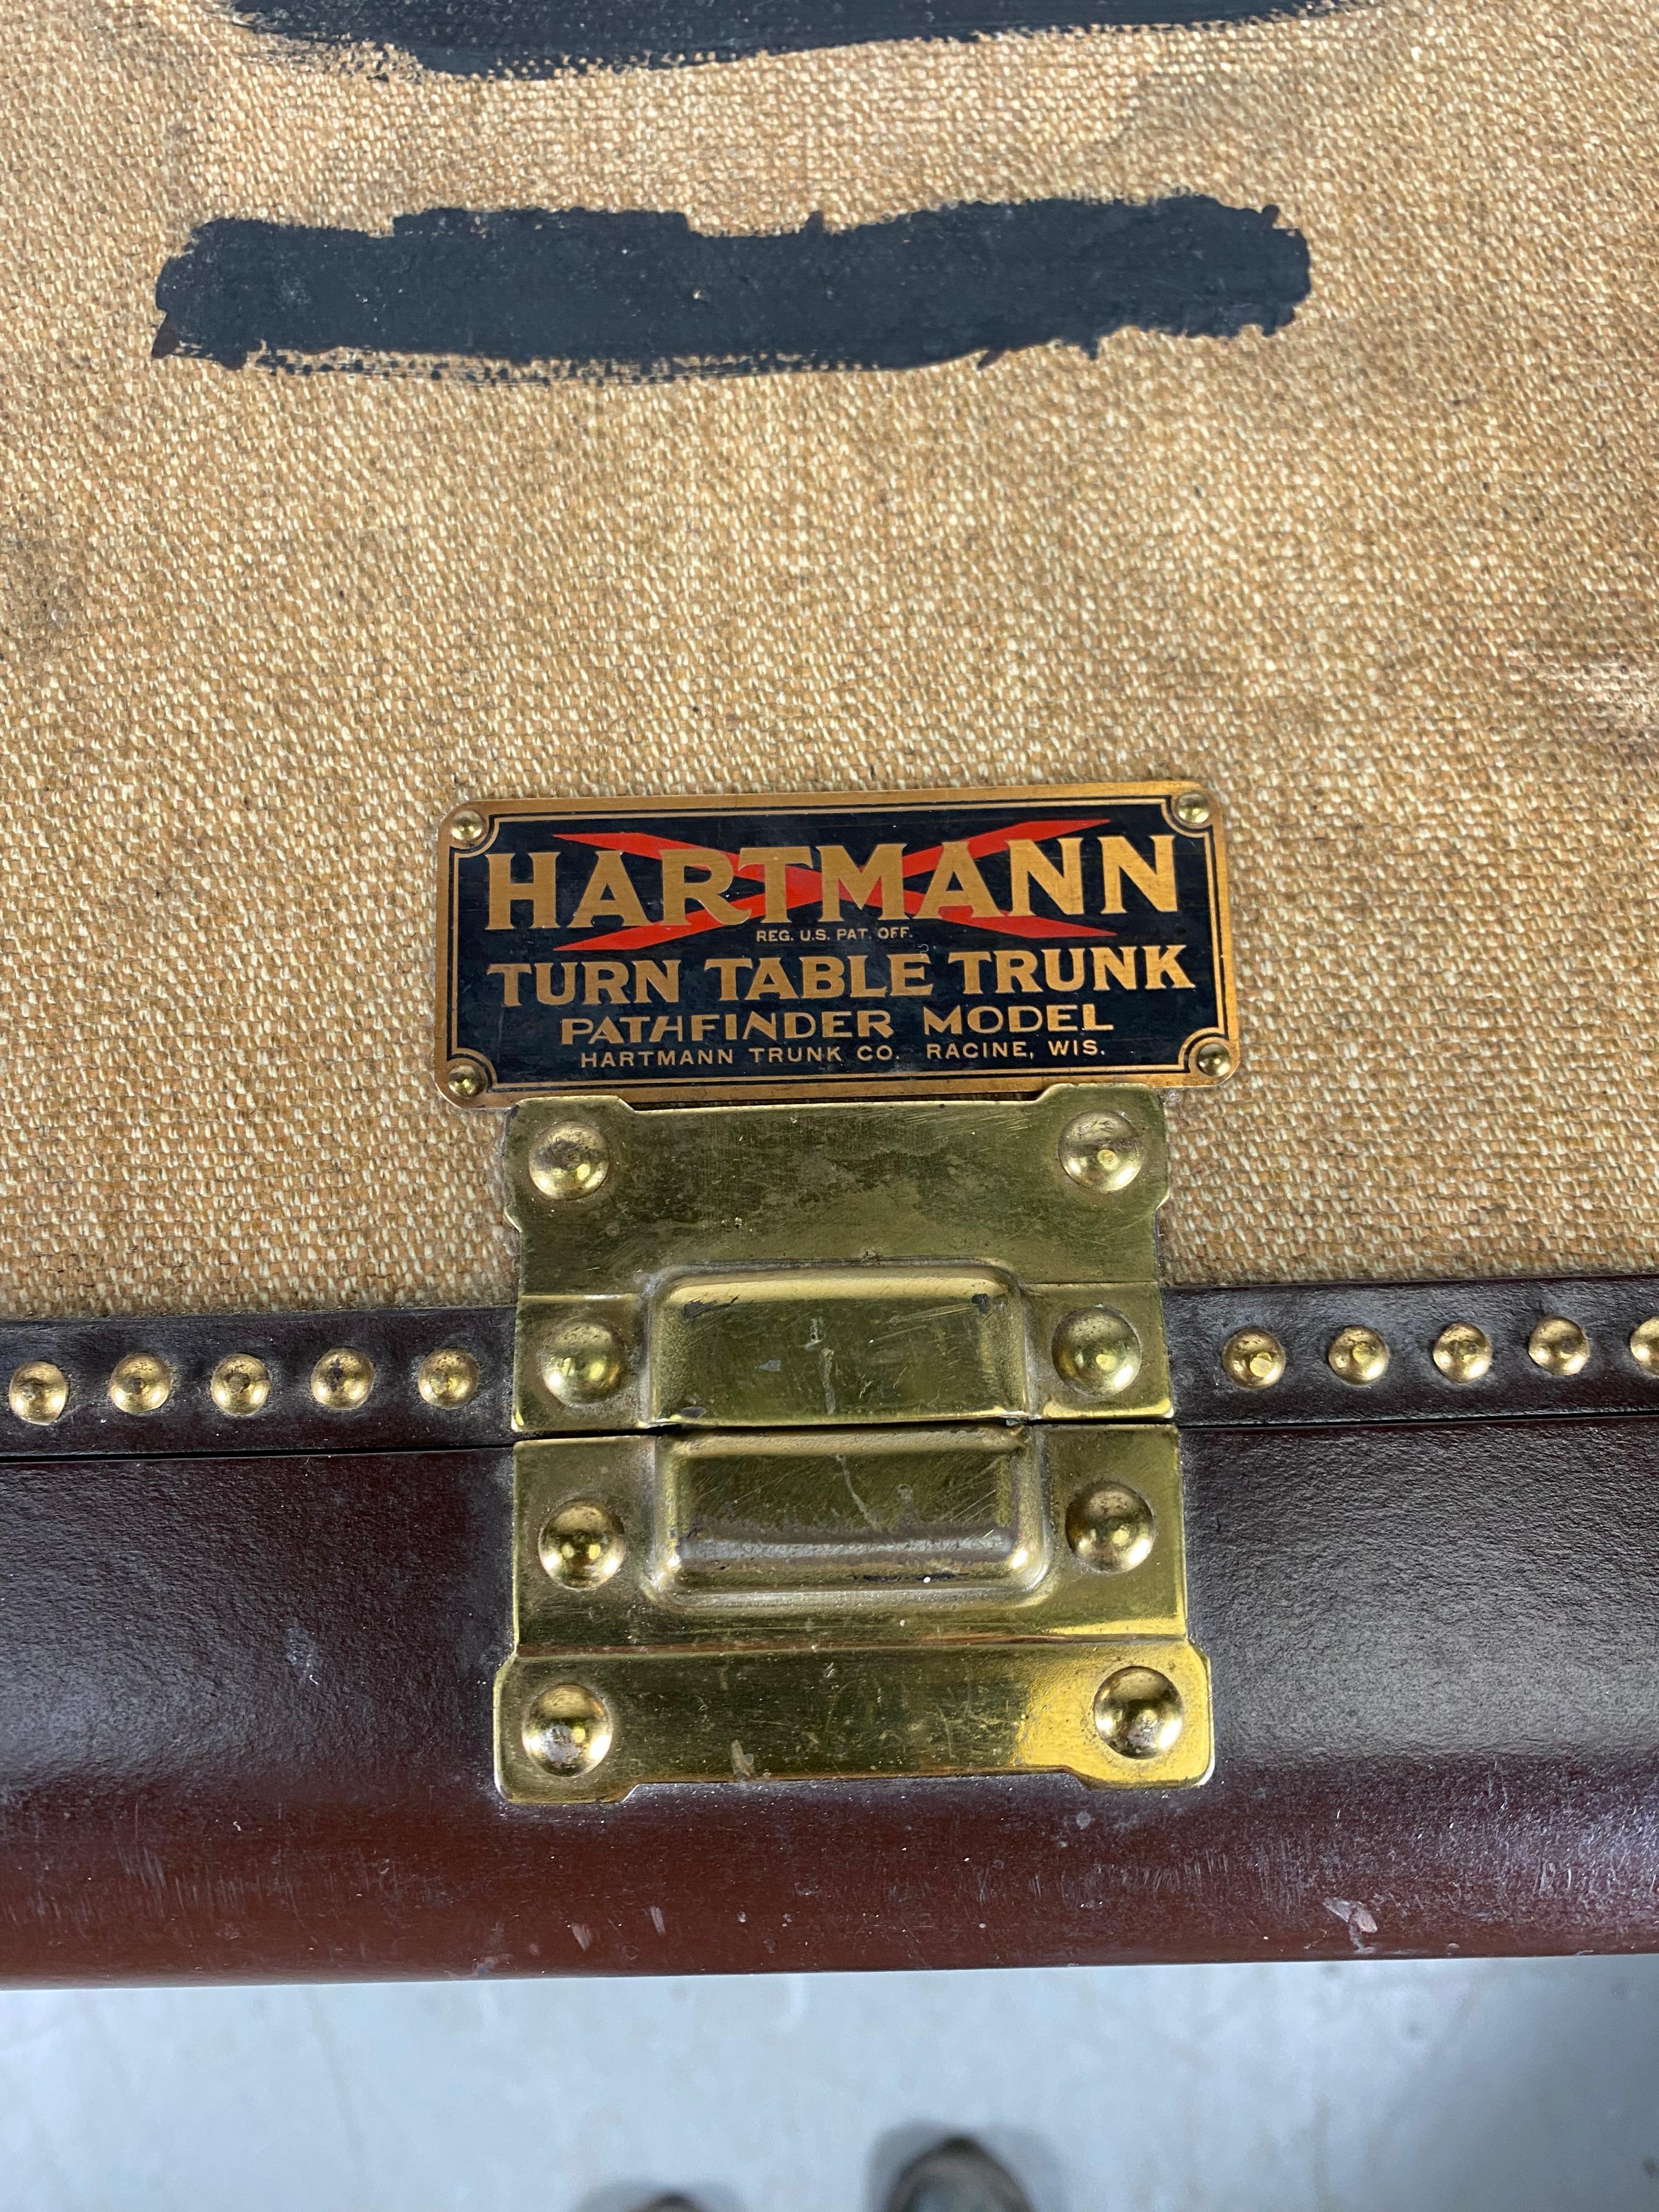 Rare Pathfinder Imperial wardrobe luggage case on revolving base, made by Hartmann for Saks Fifth Avenue. The interior has a bank of drawers on one side, original leather pulls... accordion style pull out hangers on the other. Also retains original